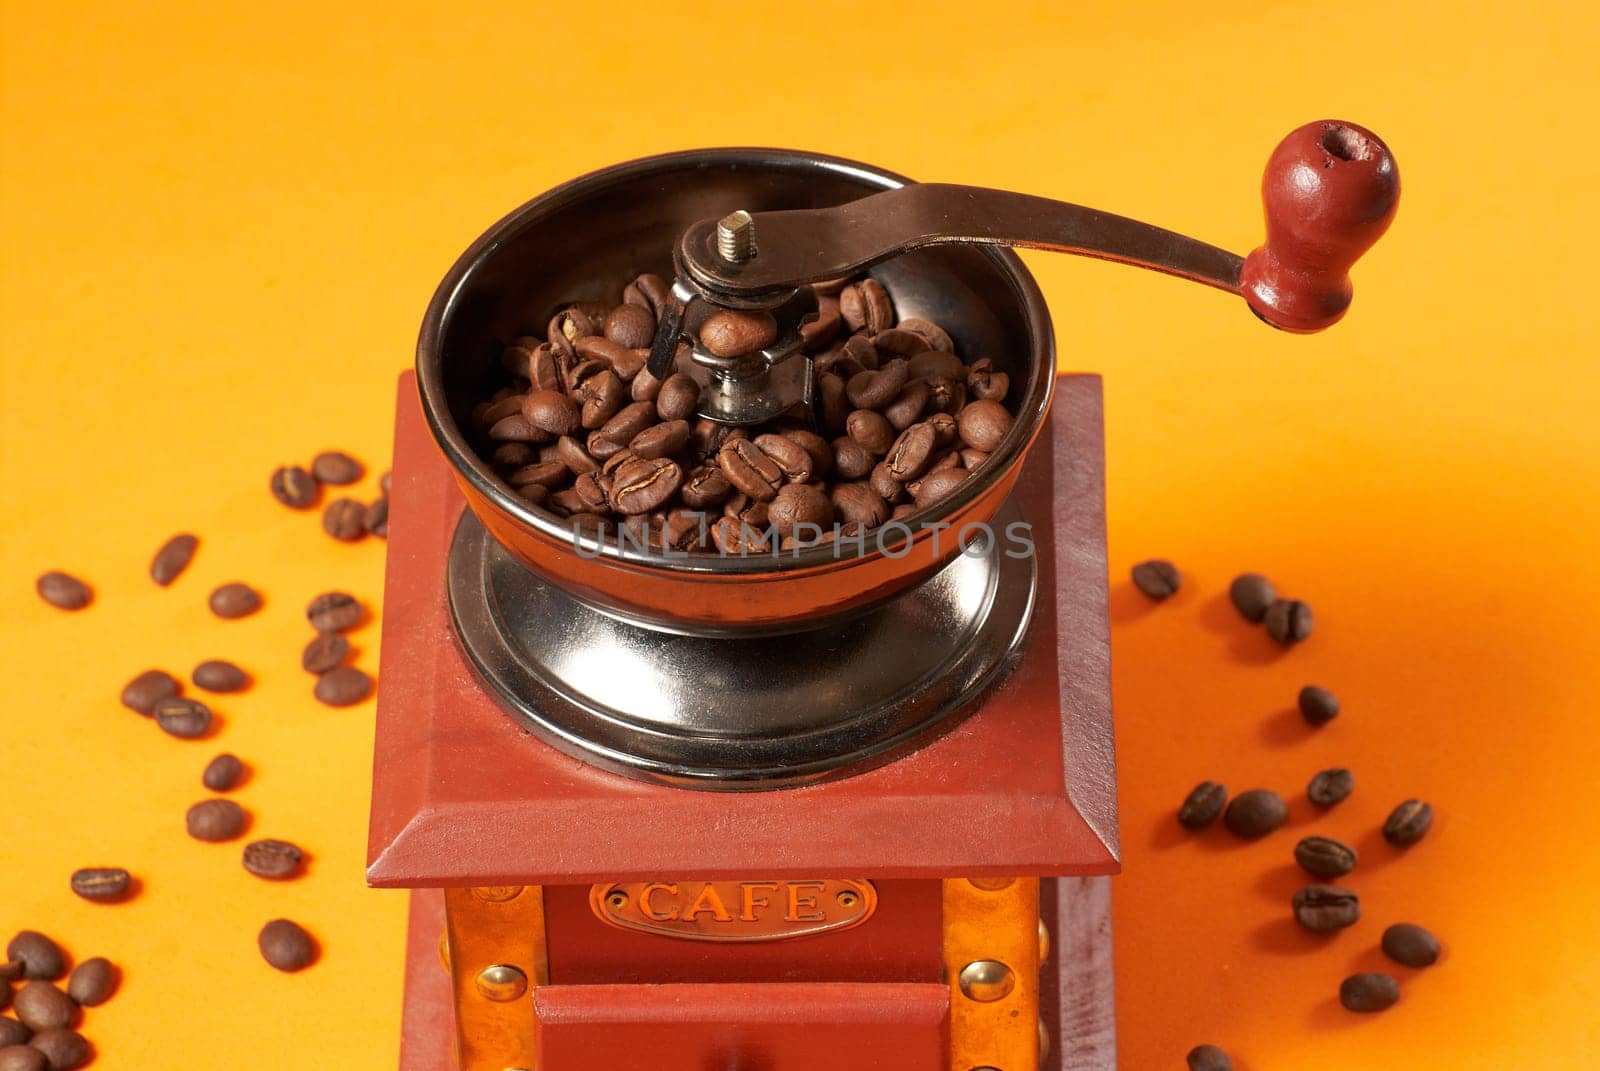 Manual coffee grinder for grinding coffee beans. On an orange background with coffee beans